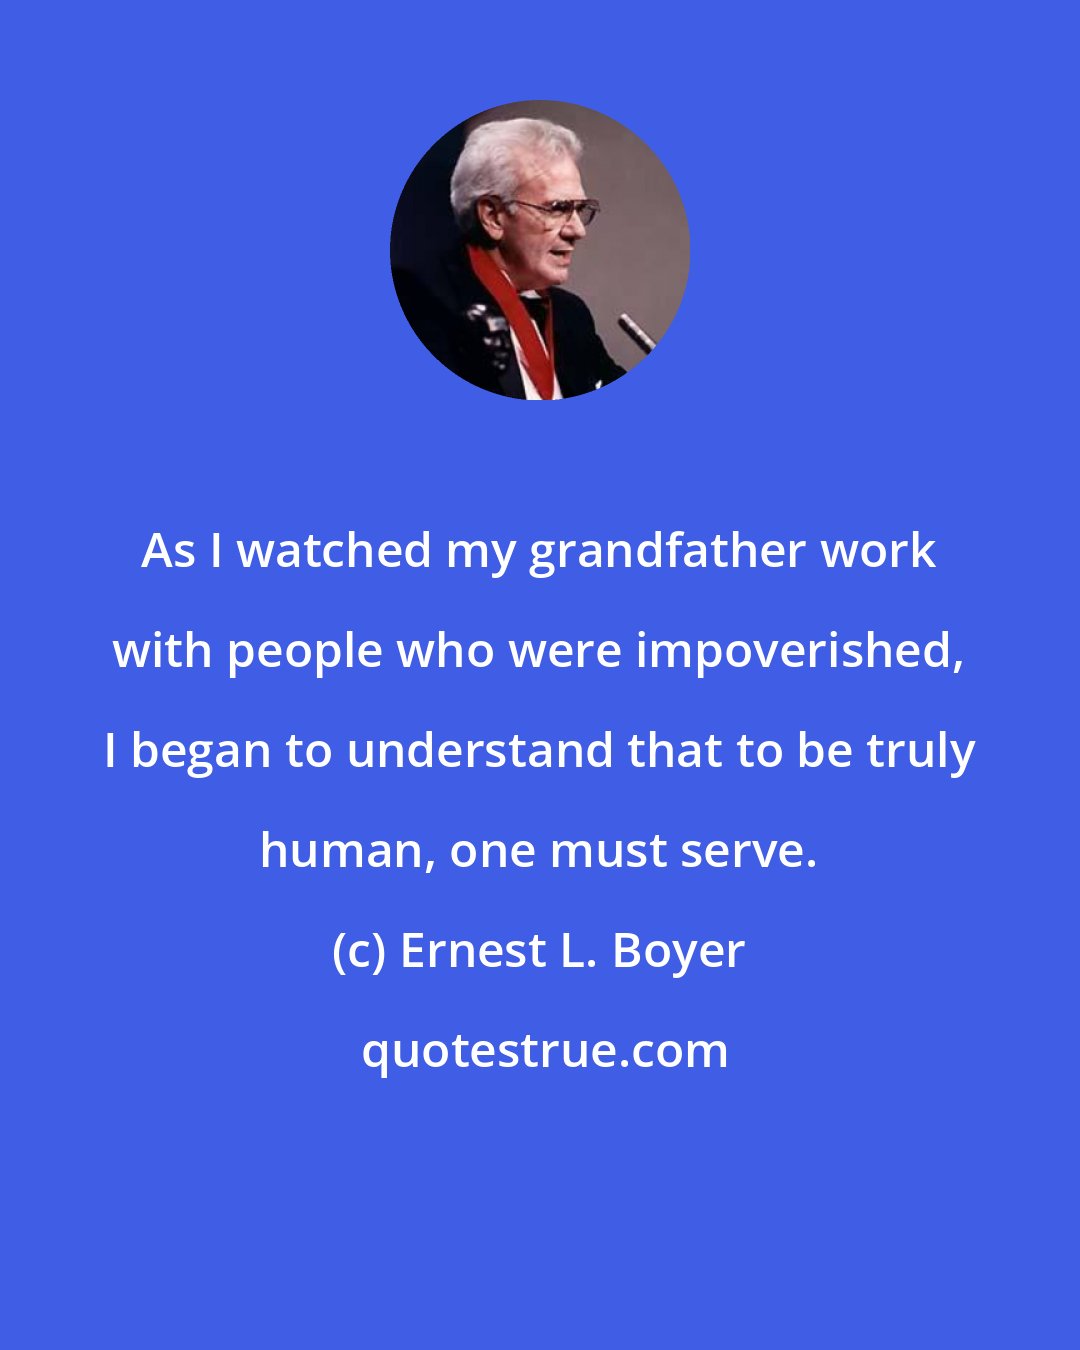 Ernest L. Boyer: As I watched my grandfather work with people who were impoverished, I began to understand that to be truly human, one must serve.